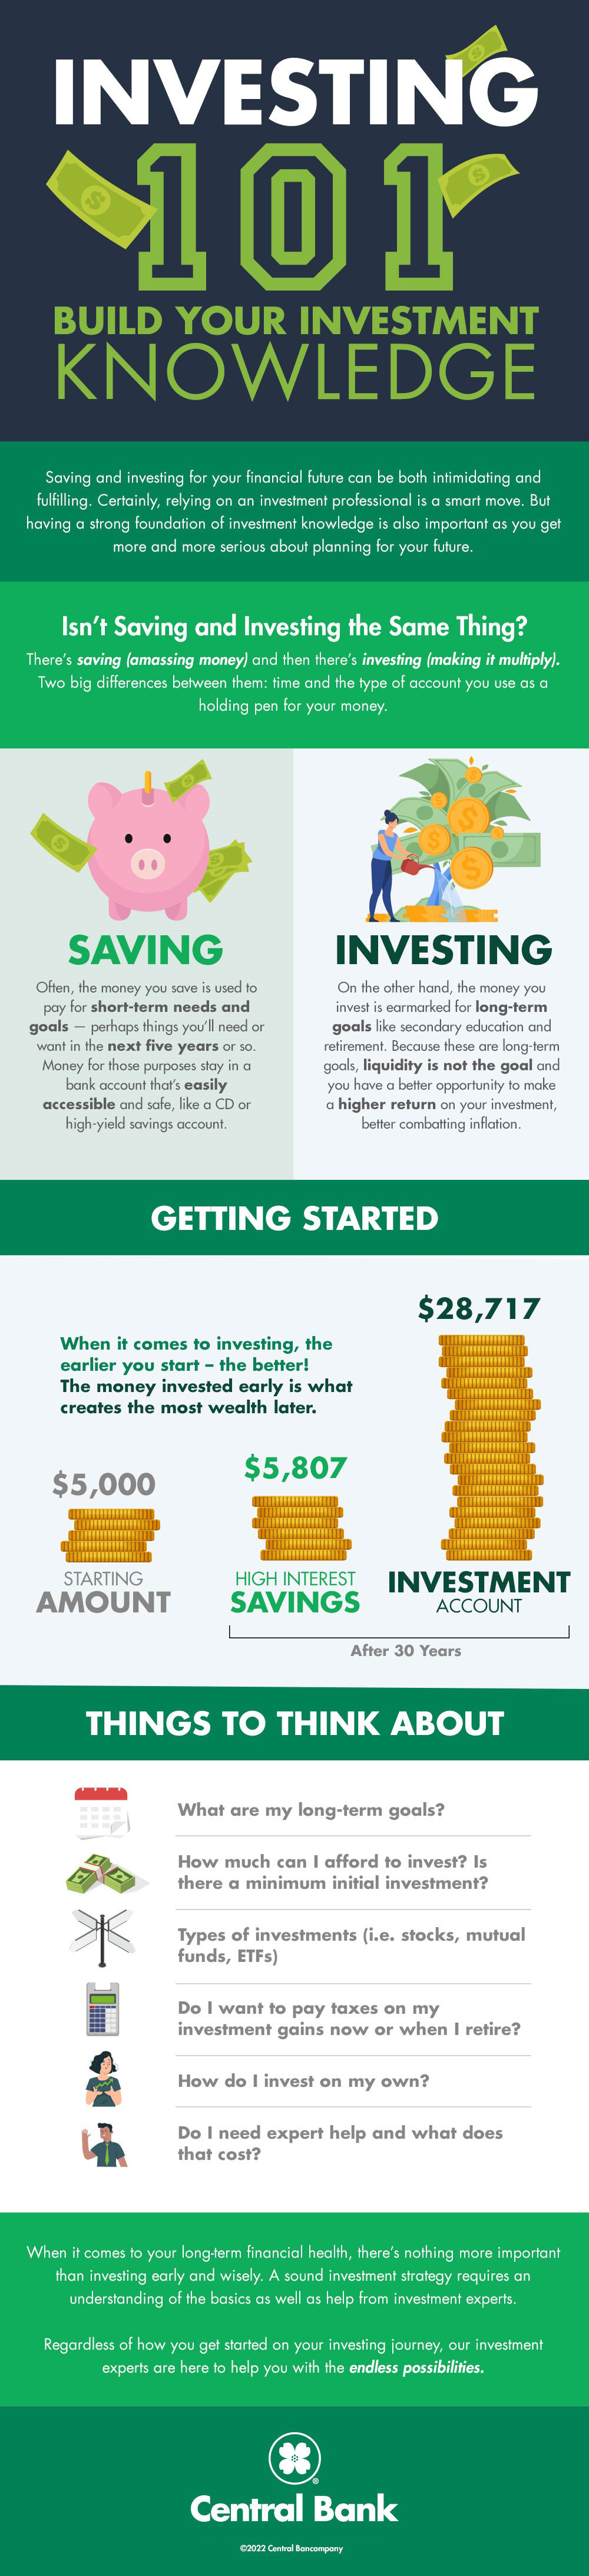 Investing 101: Build Your Investment Knowledge infographic